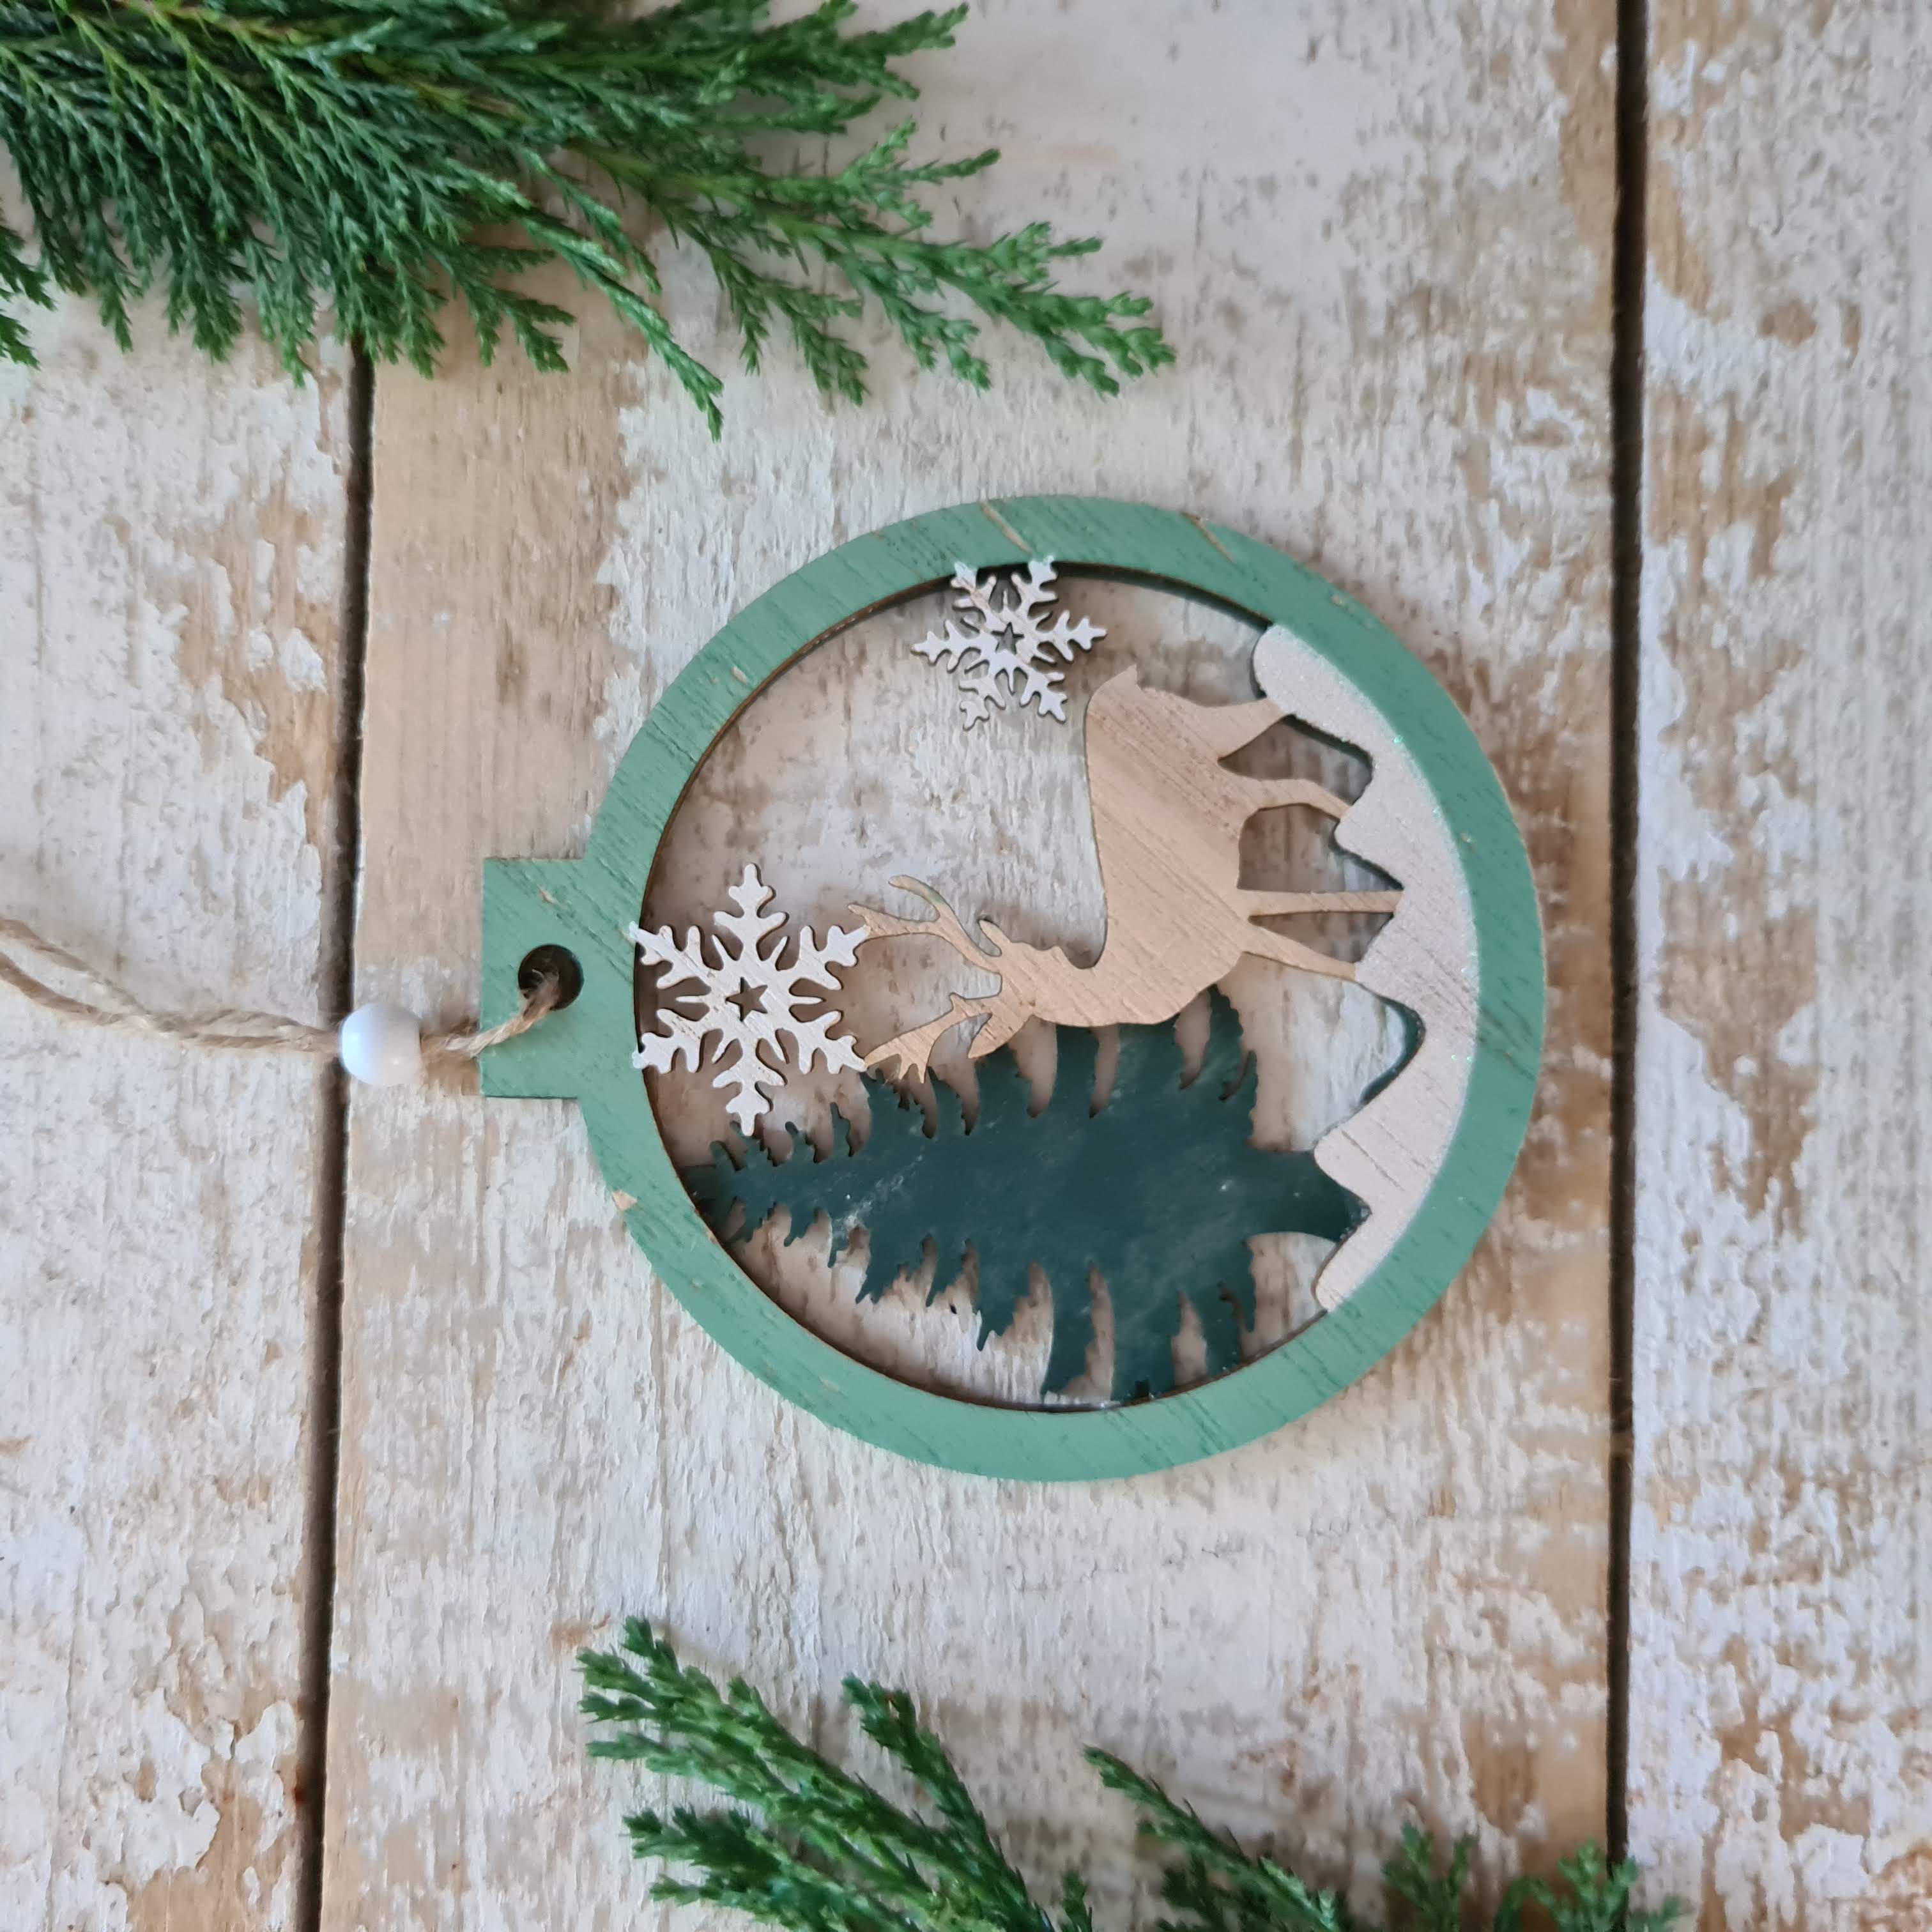 Set of 2 Wooden Ornaments in a Christmas Ball Shape with a 3D Effect Hand-painted Winter Wonderland with reindeer Christmas forest